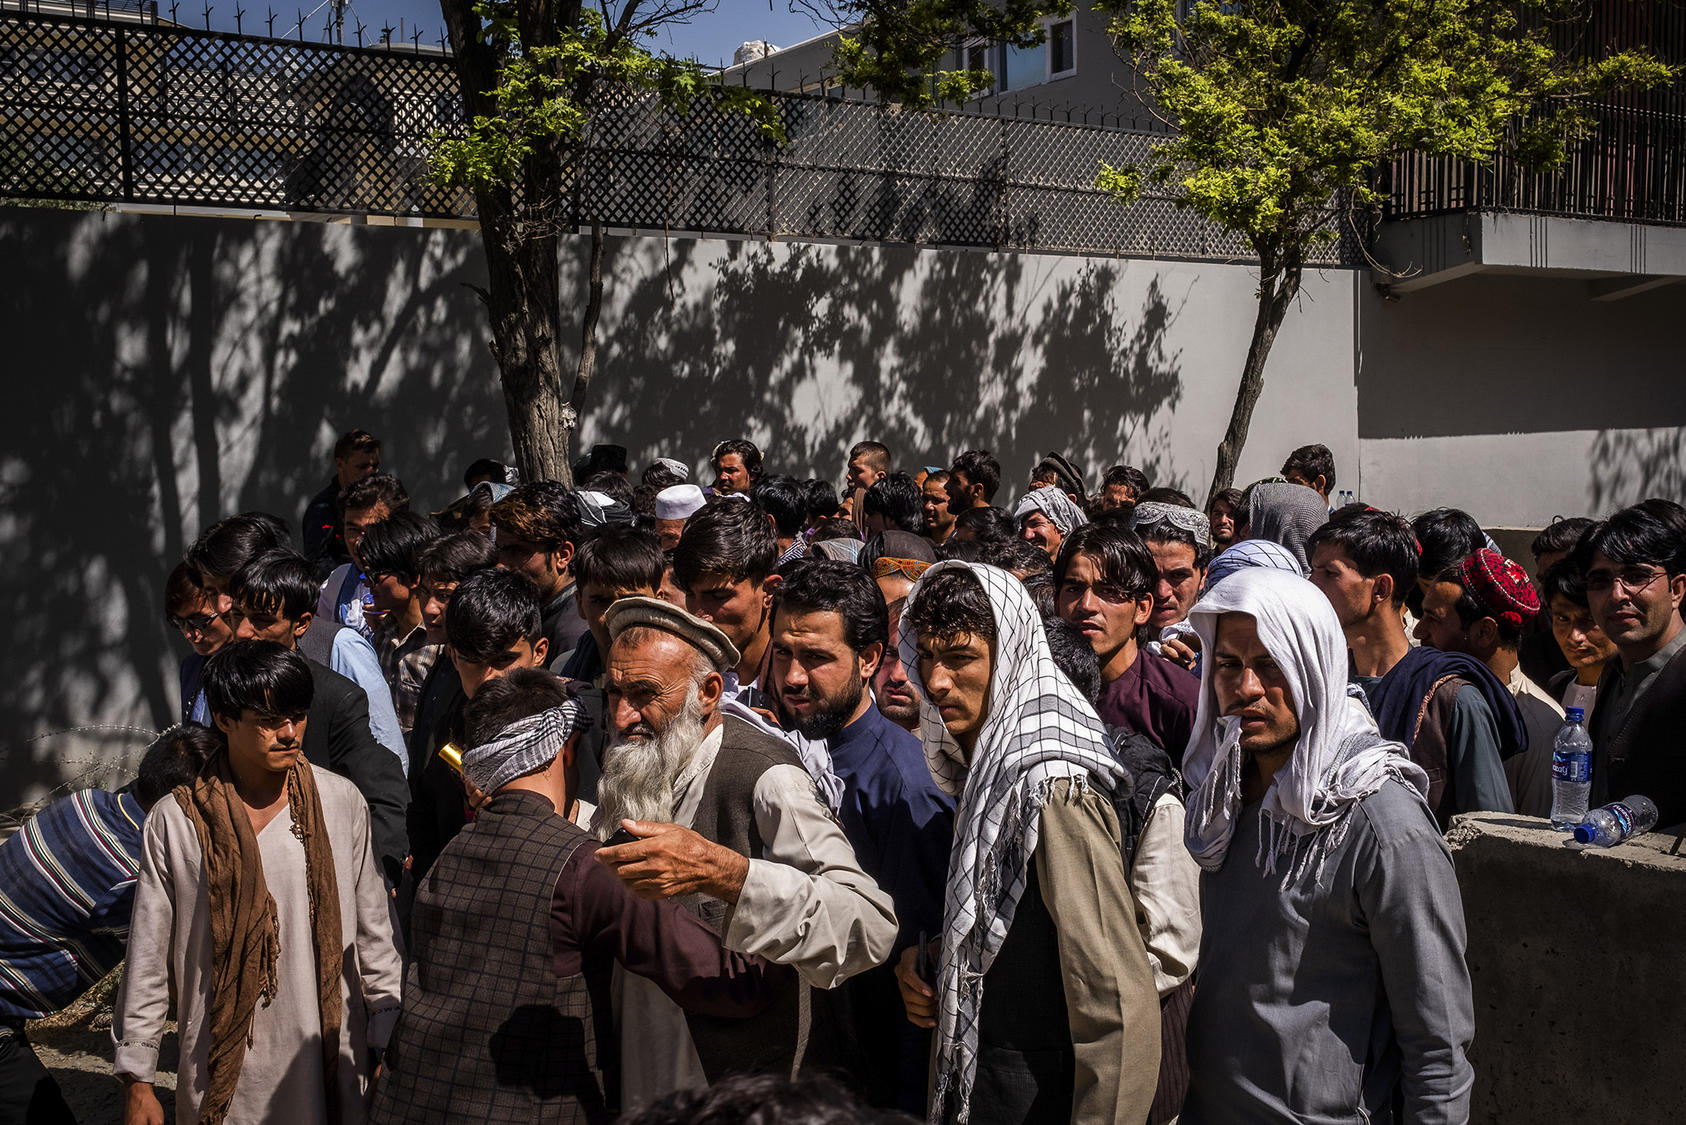 Attendees are searched before entering a political rally in Kabul. Voting under threat of Taliban violence, Afghans across the country cast ballots for parliament on October 20. (Jim Huylebroek/The New York Times)